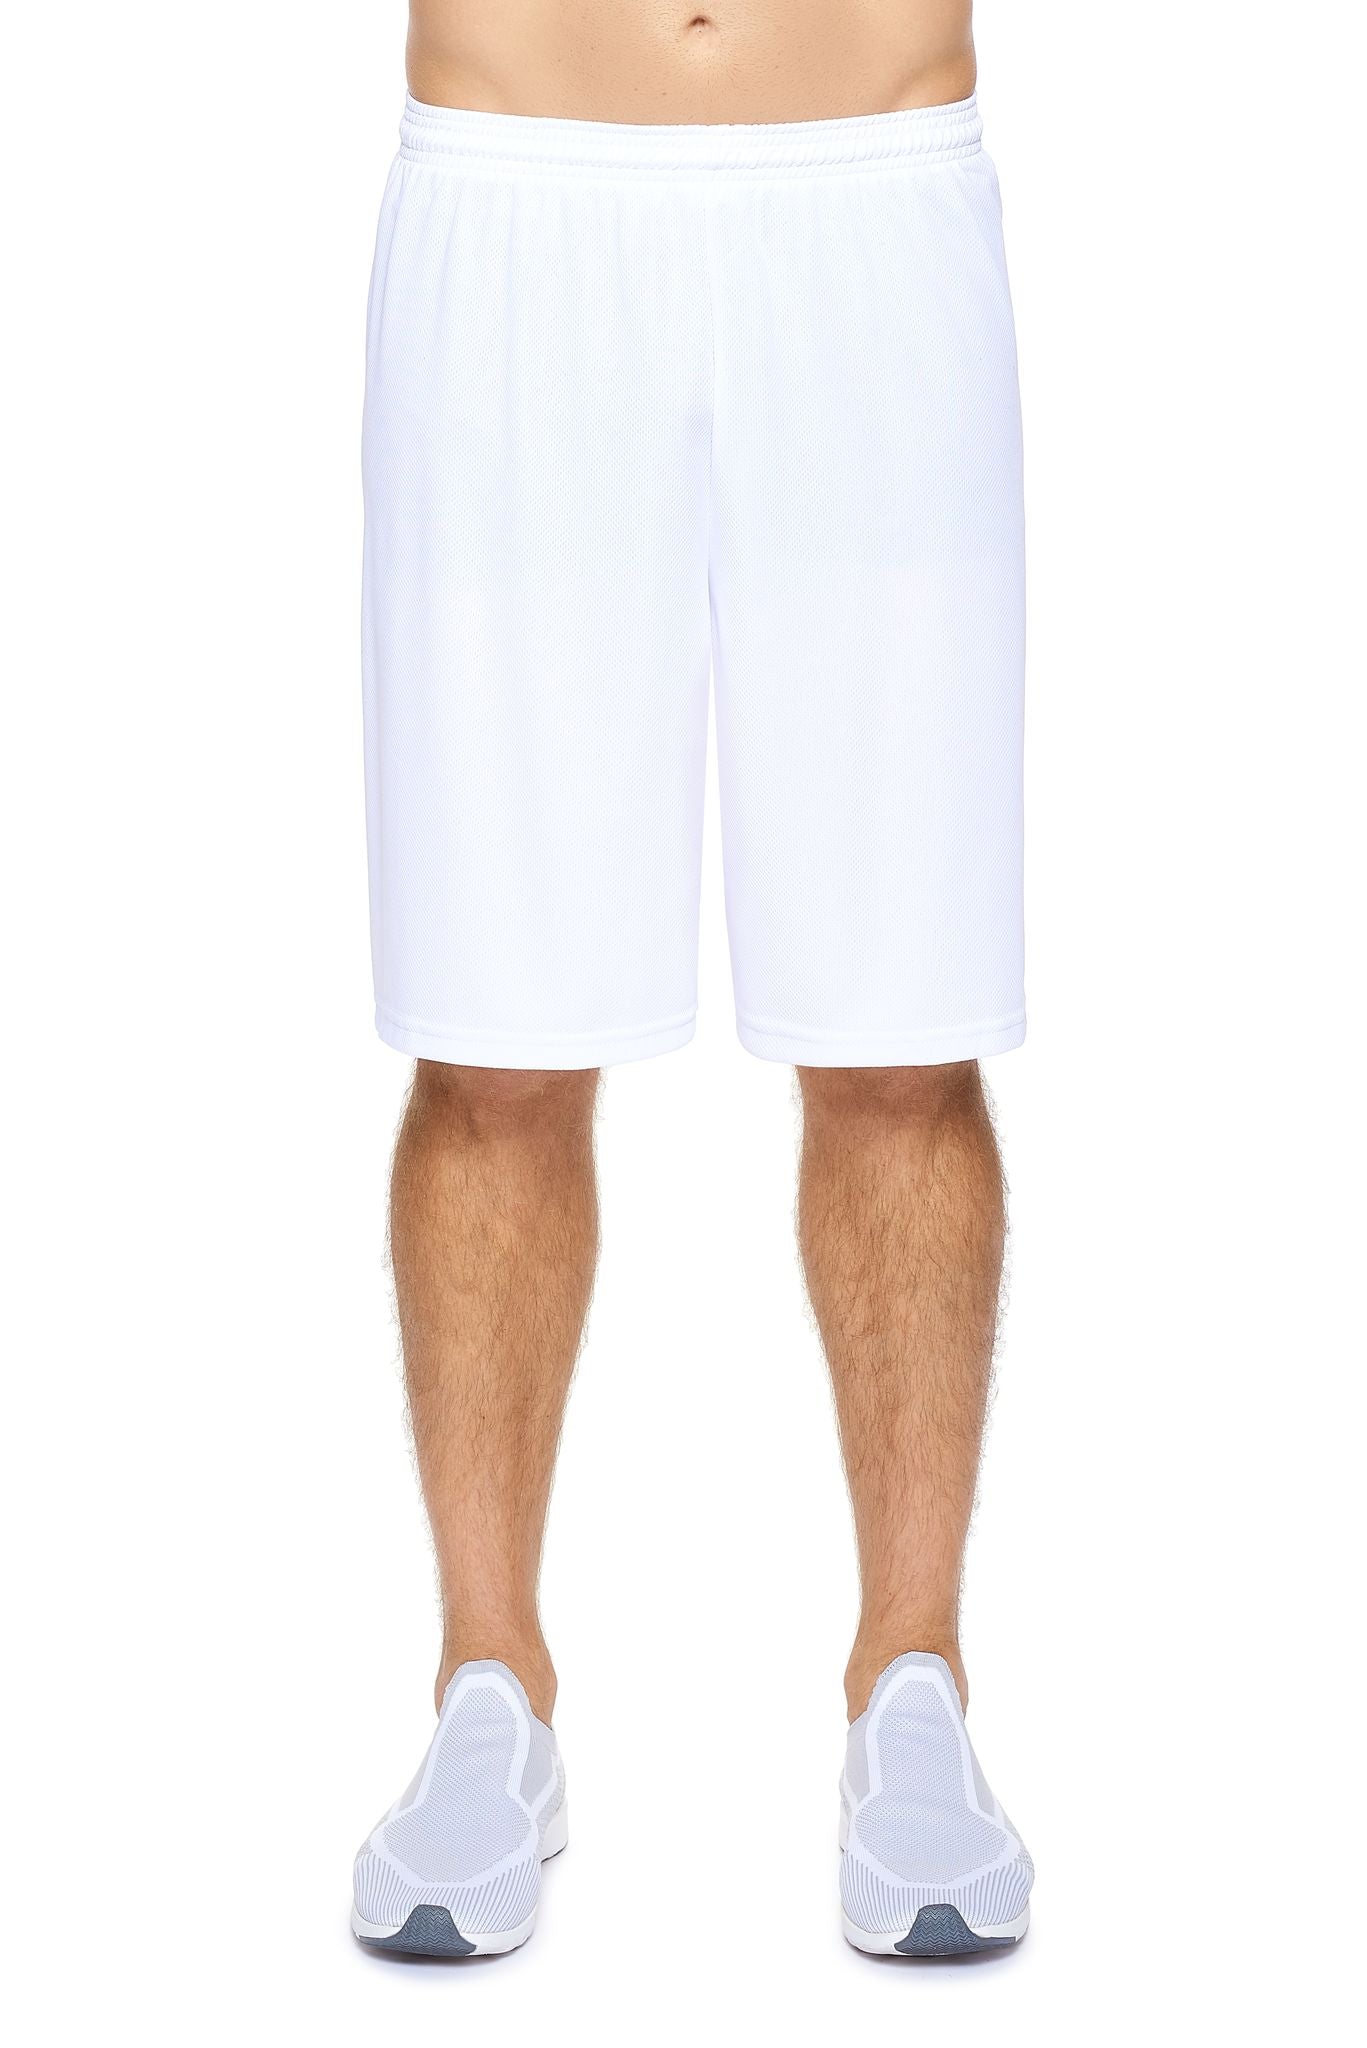 Oxymesh™ Training Shorts 🇺🇸 - Expert Brand Apparel#color_white